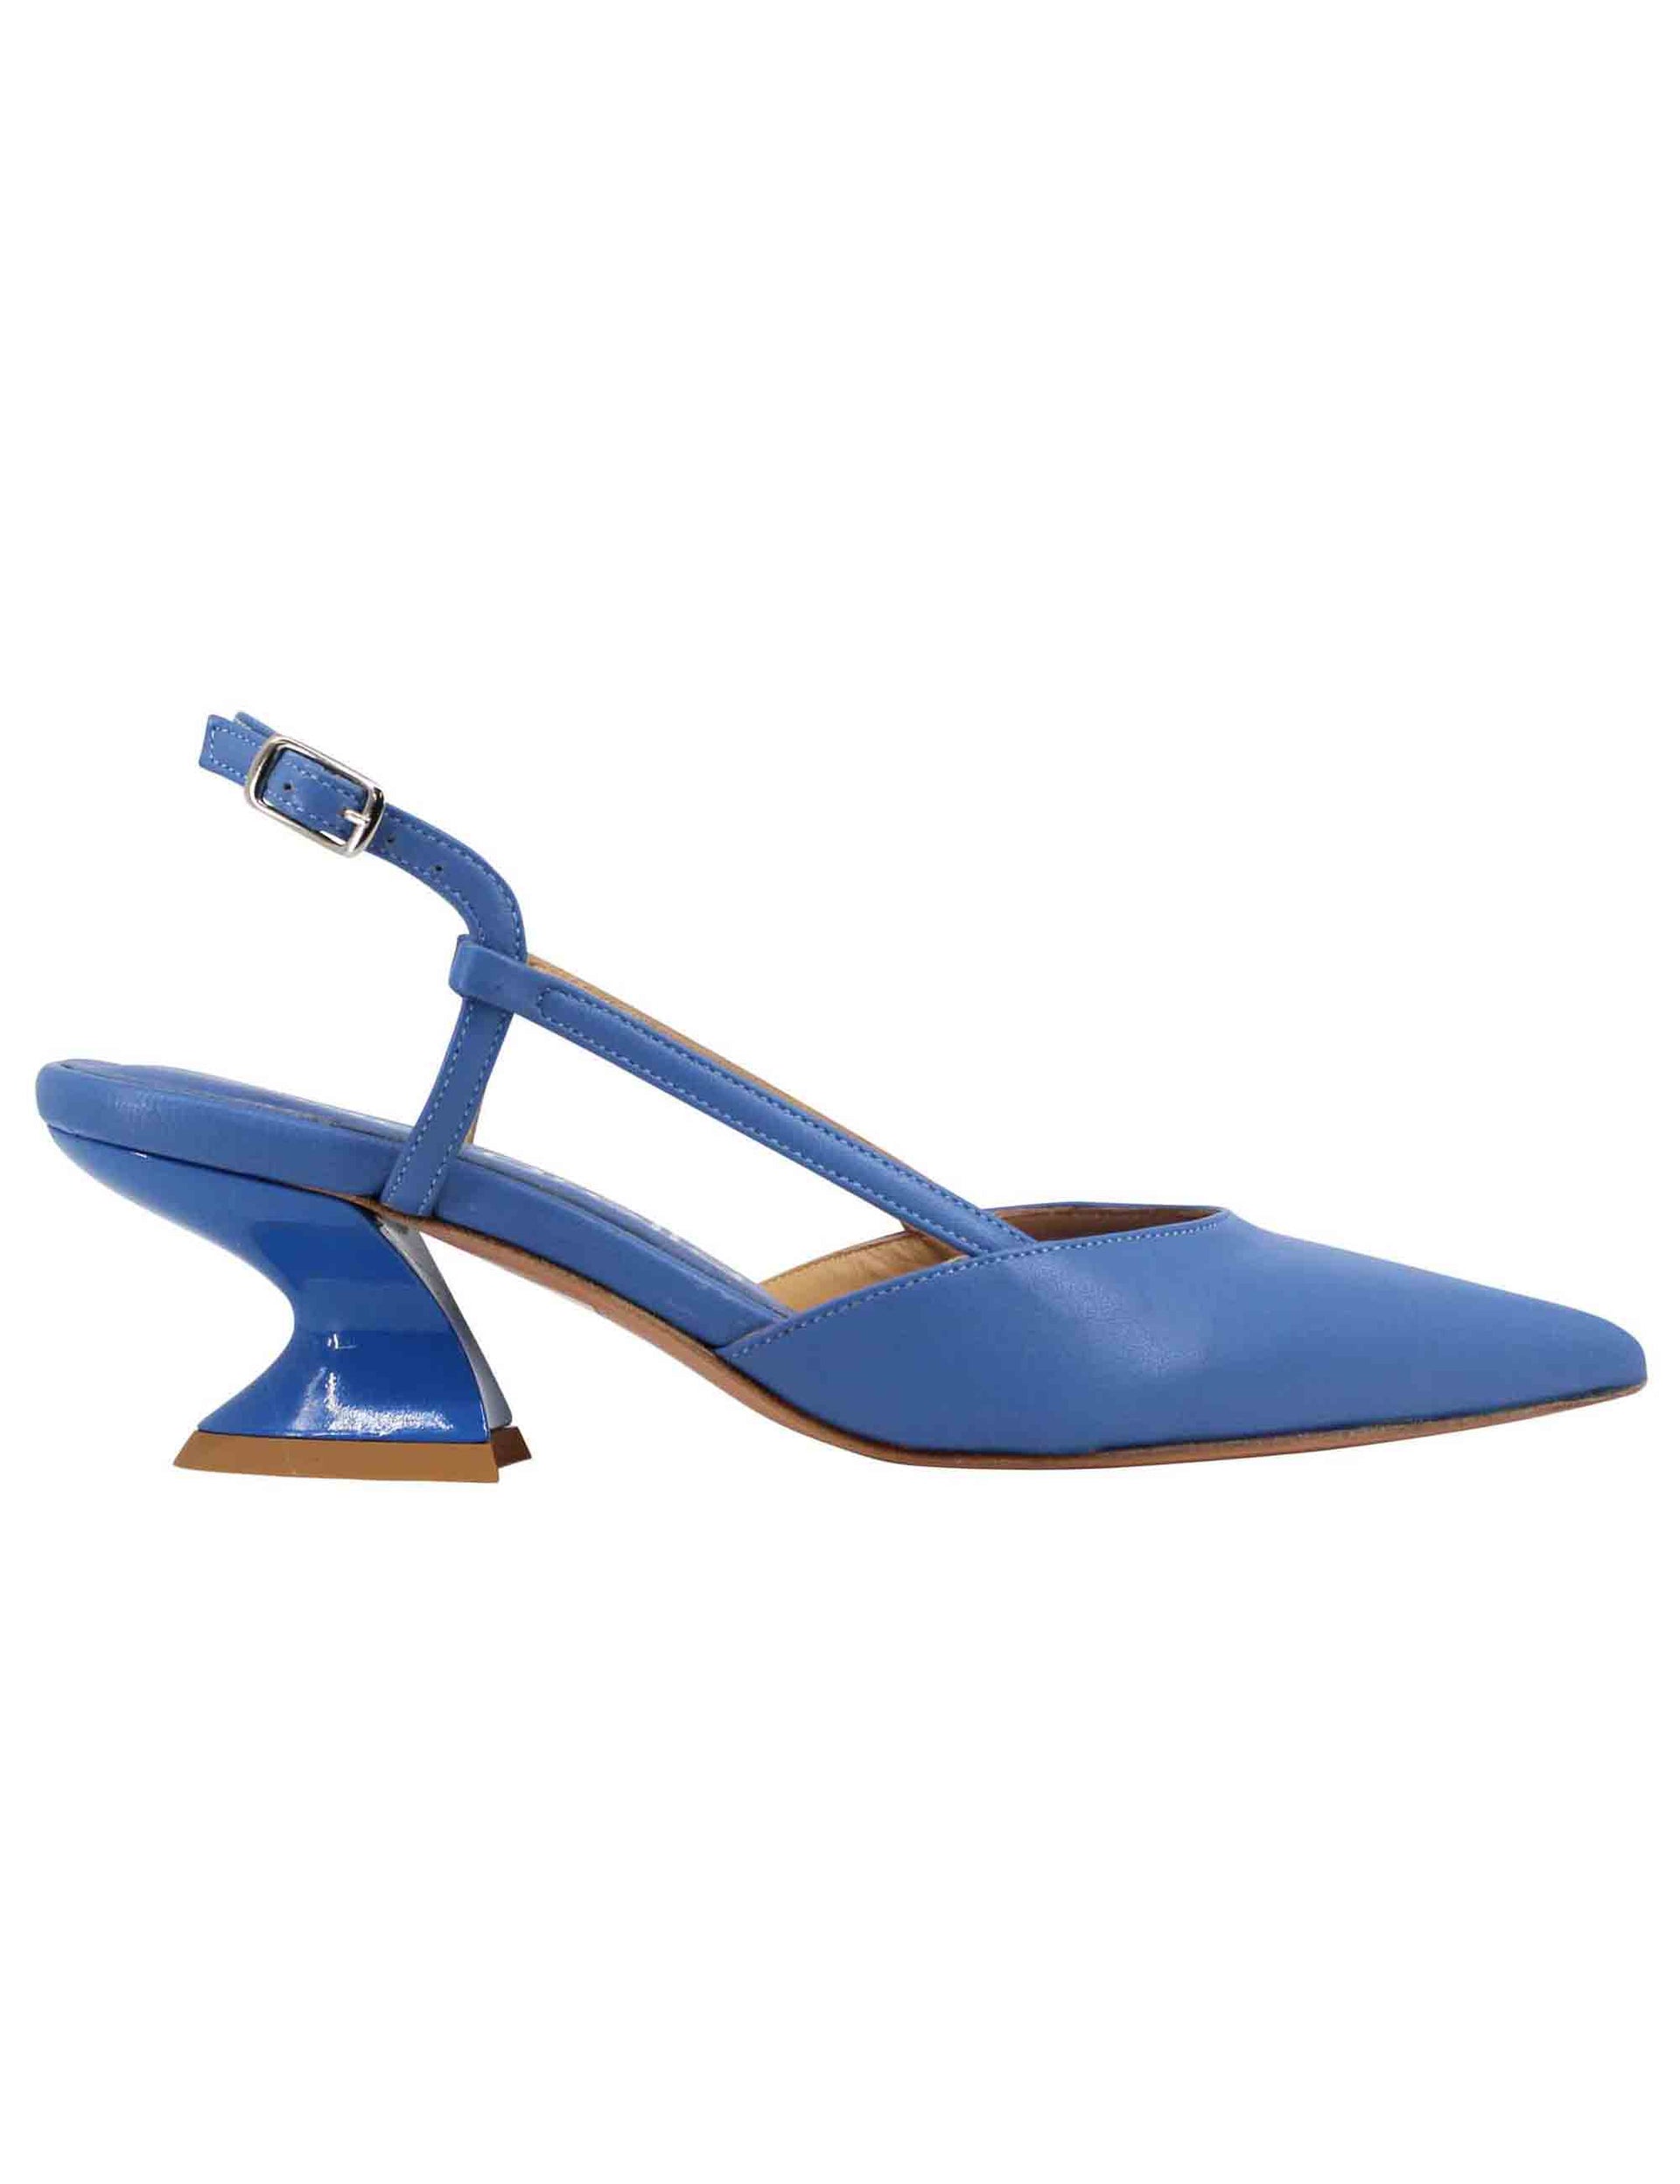 Women's slingback pumps in blue leather with wedge heel